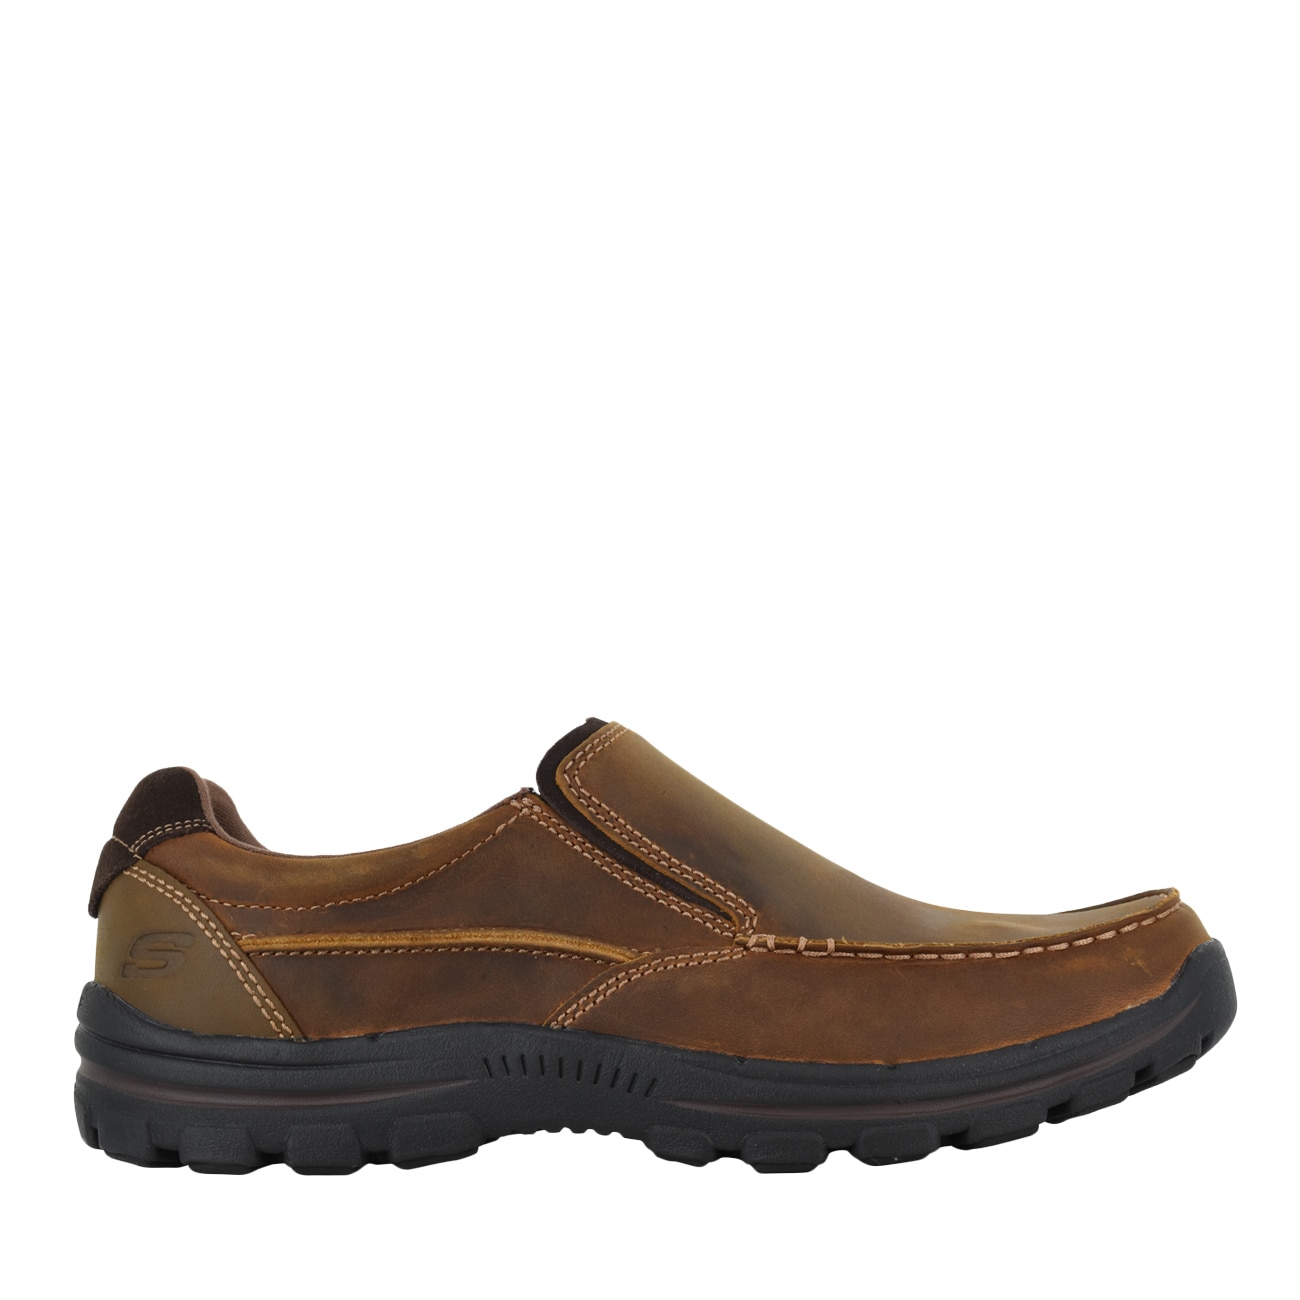 Skechers Relaxed Fit: Braver - Rayland Slip-On | DSW Canada